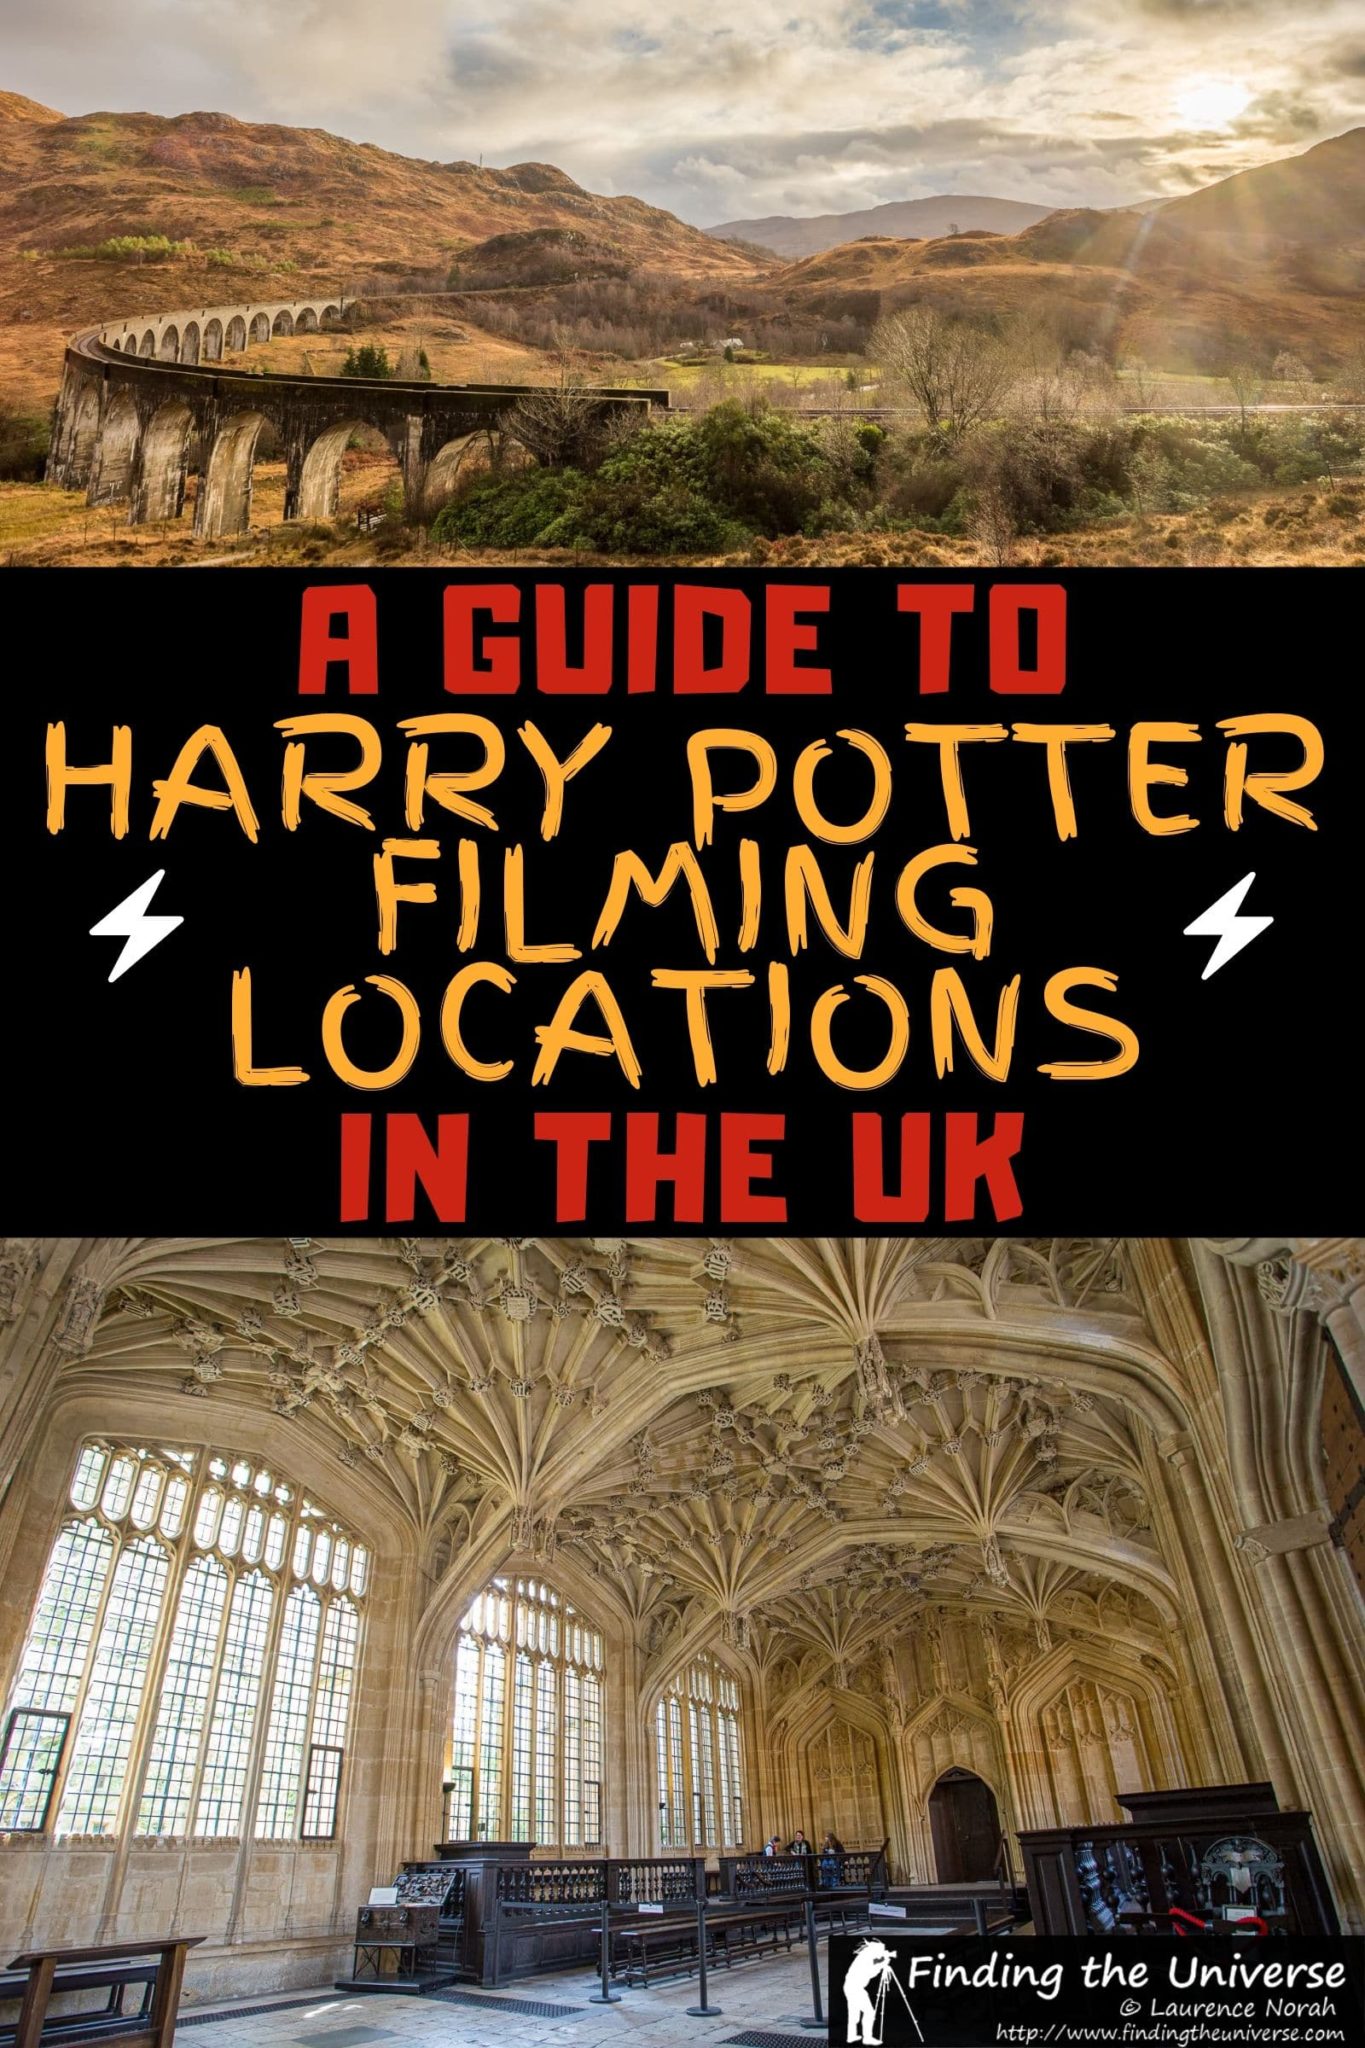 The Top Harry Potter Filming Locations in the UK Finding the Universe